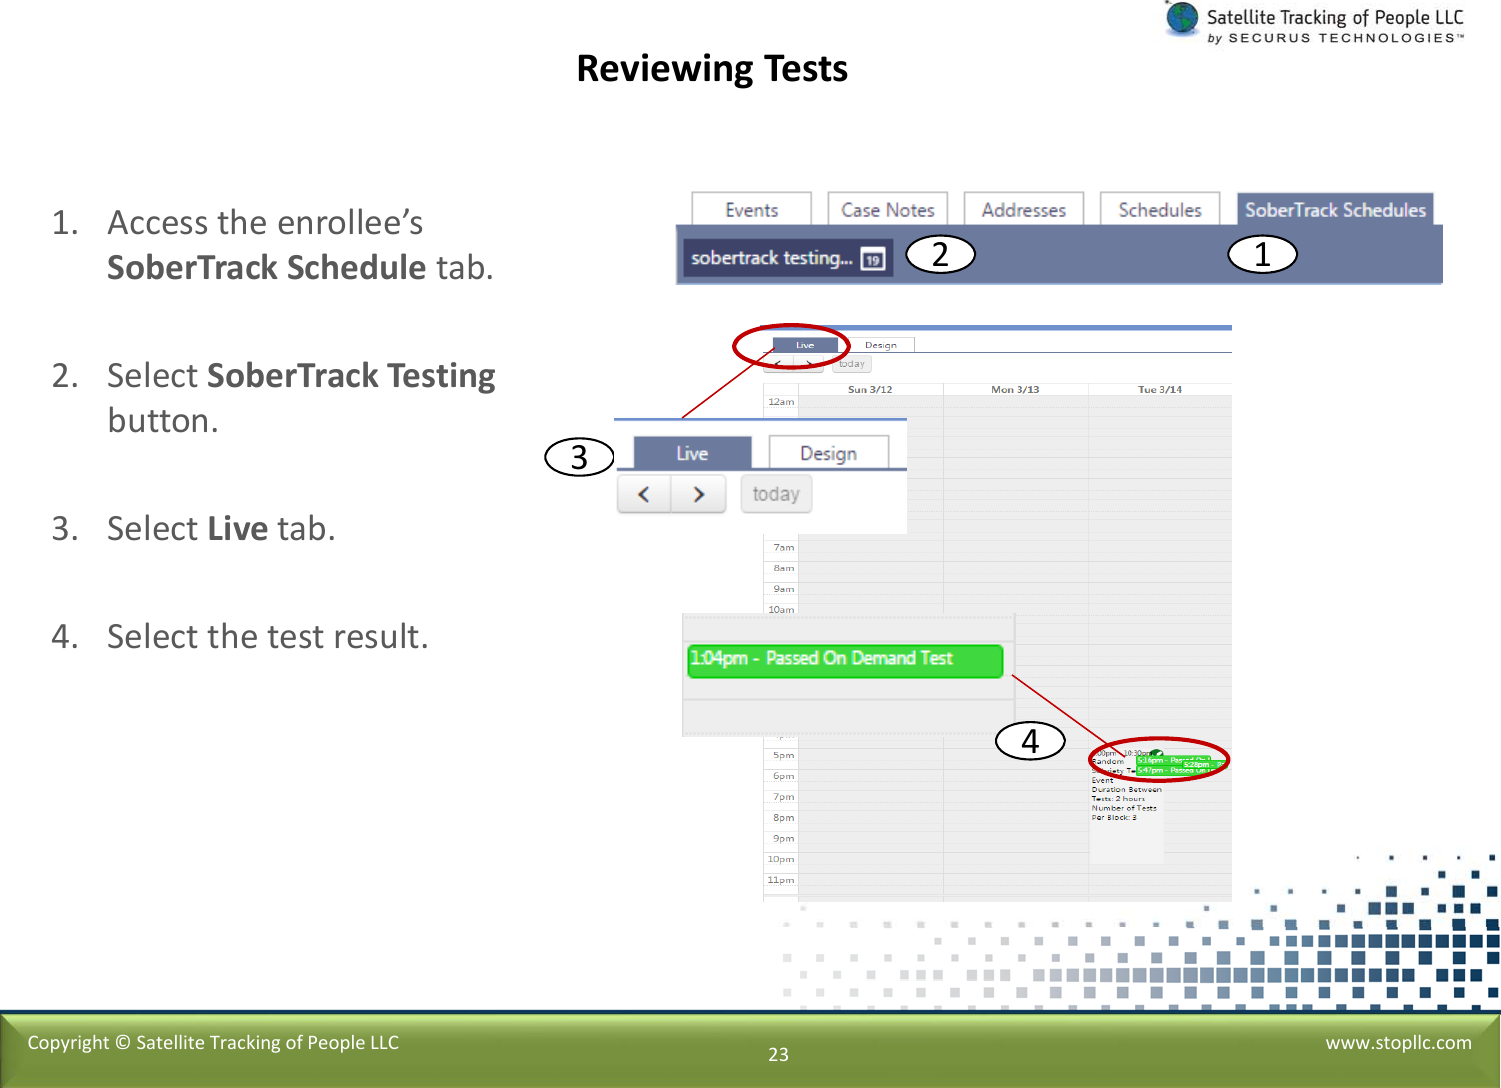 23ReviewingTests1. Accesstheenrollee’sSoberTrackSchedule tab.2. SelectSoberTrackTestingbutton.3. SelectLivetab.4. Selectthetestresult.1234Copyright©SatelliteTrackingofPeopleLLC www.stopllc.com23